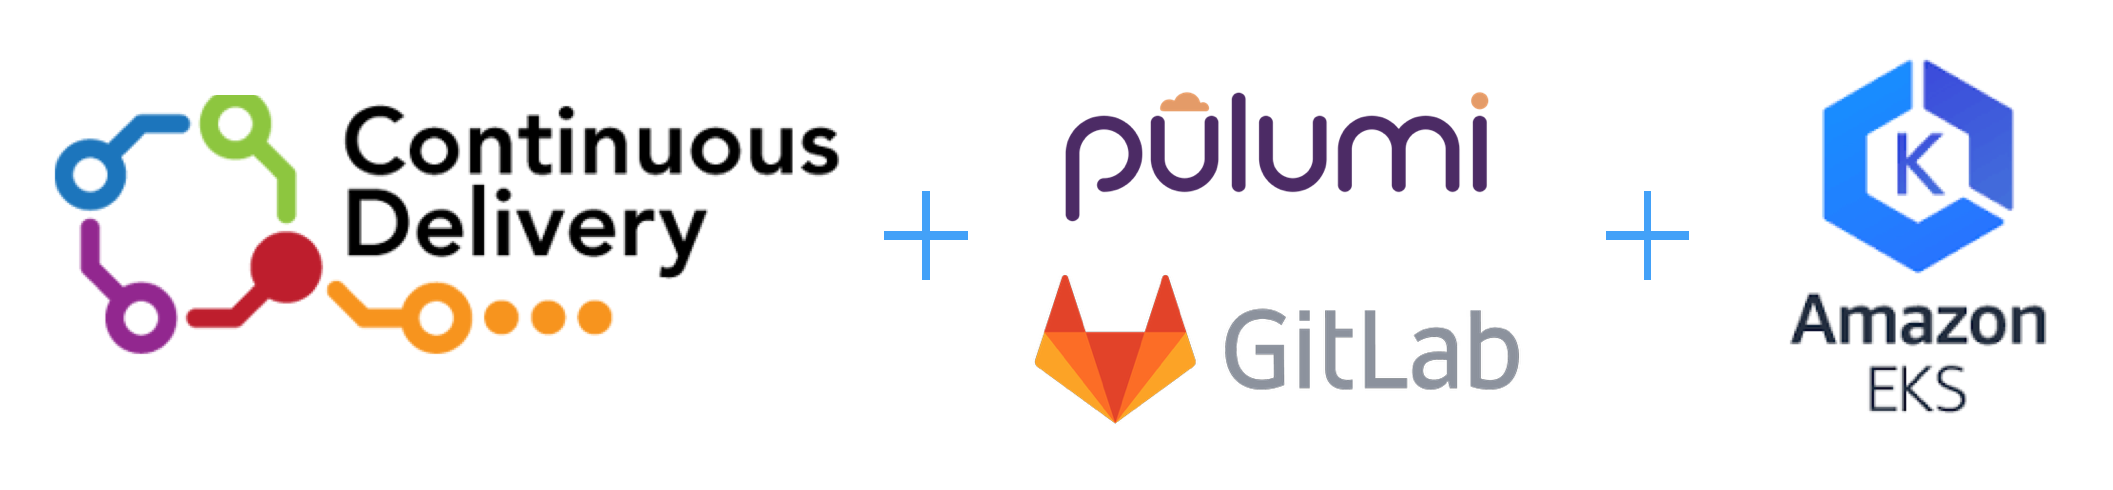 Continuous Delivery with GitLab and Pulumi on Amazon EKS